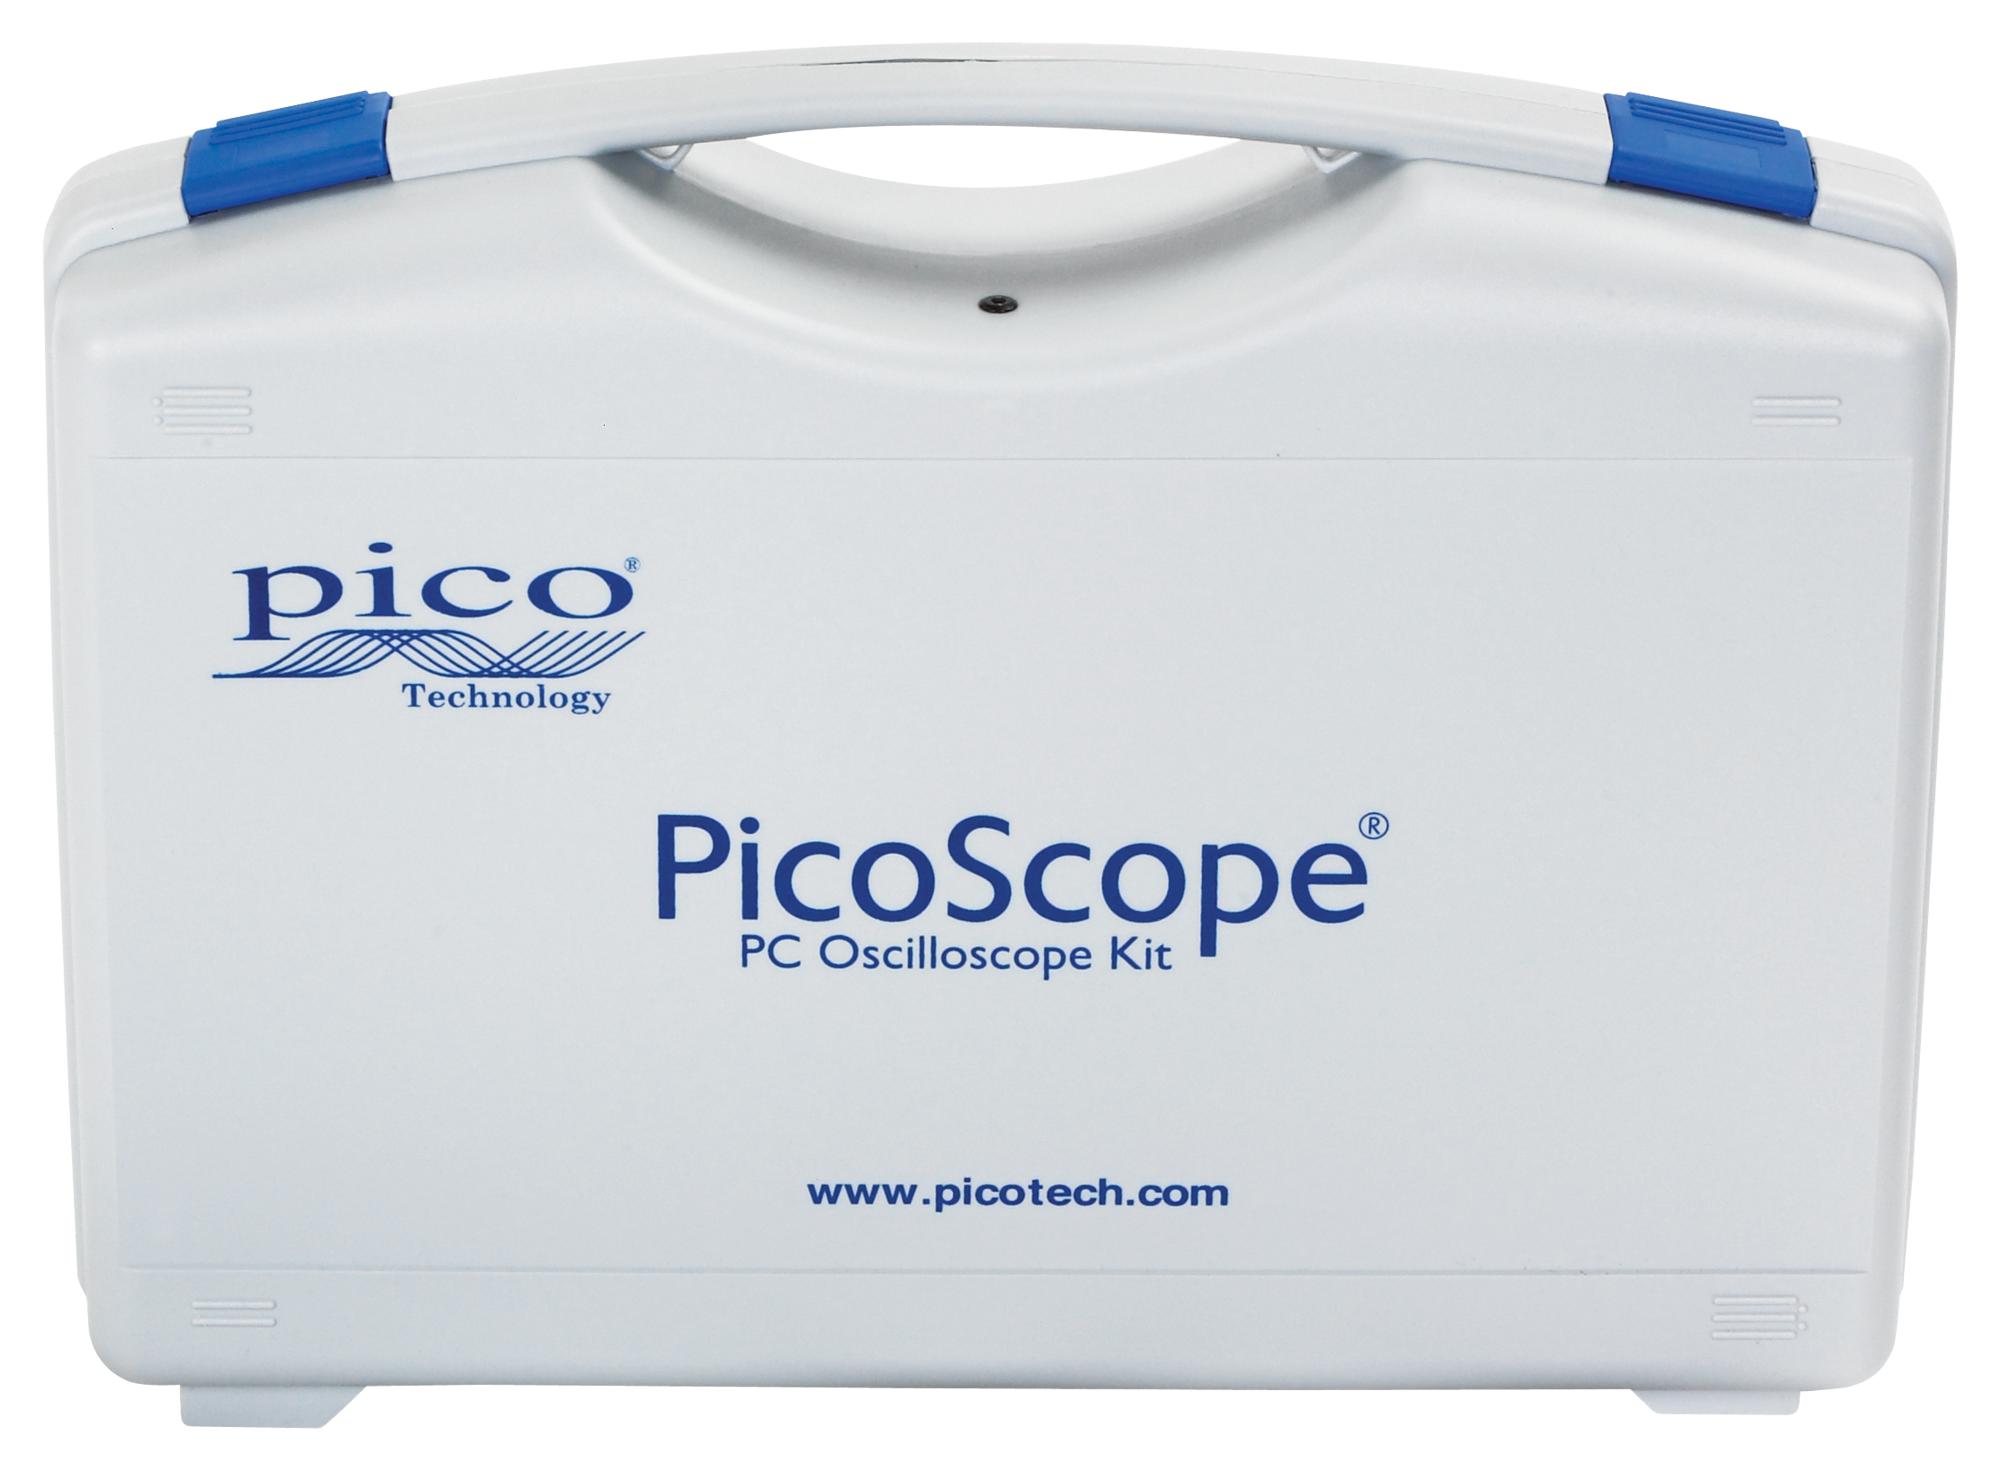 PICO TECHNOLOGY Test Equipment Carrying Cases & Holsters PP969 HARD CARRY CASE, PICOSCOPE OSCILLOSCOPE PICO TECHNOLOGY 2677037 PP969